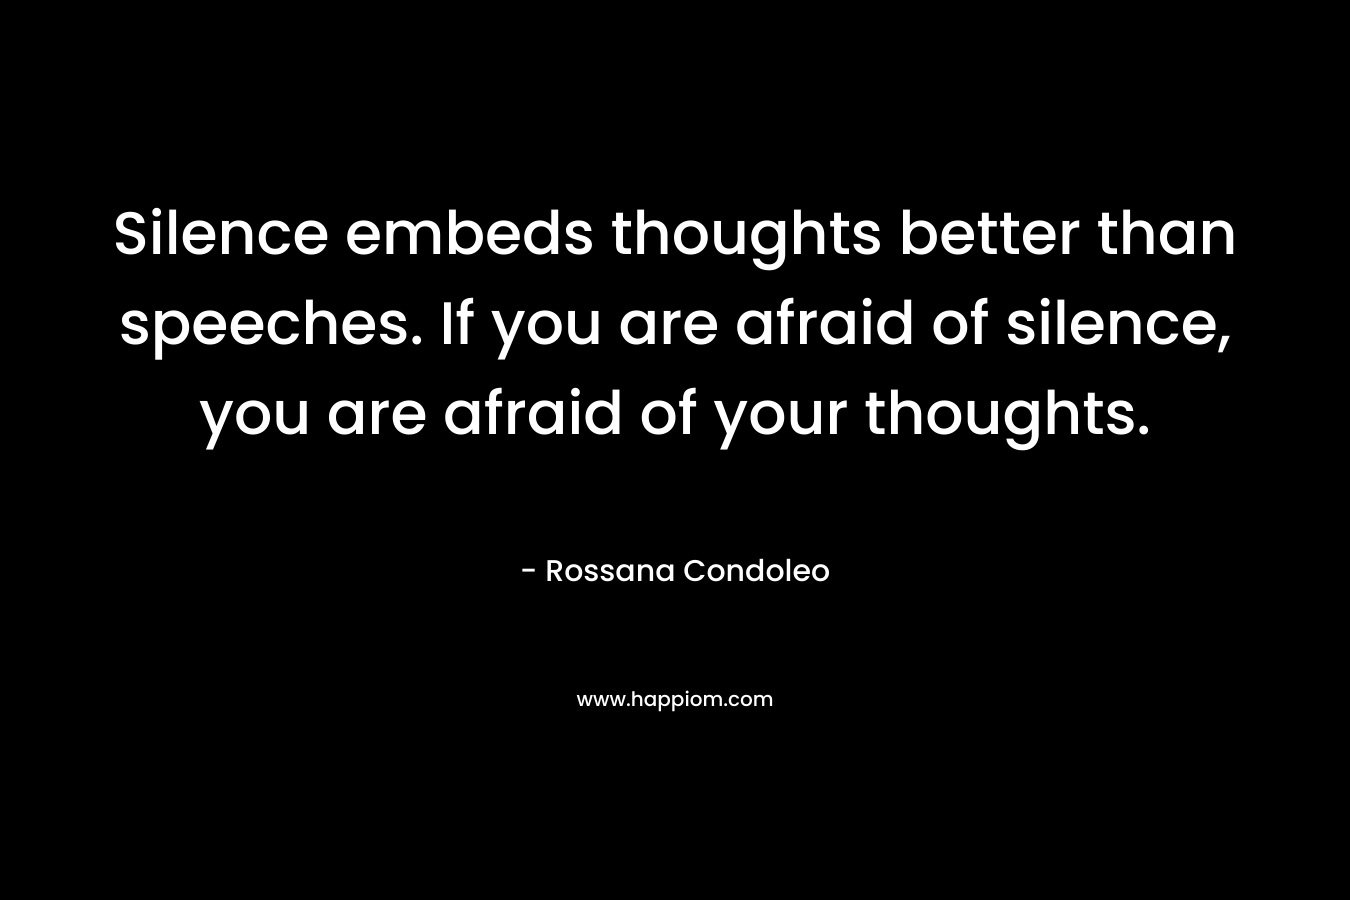 Silence embeds thoughts better than speeches. If you are afraid of silence, you are afraid of your thoughts. – Rossana Condoleo